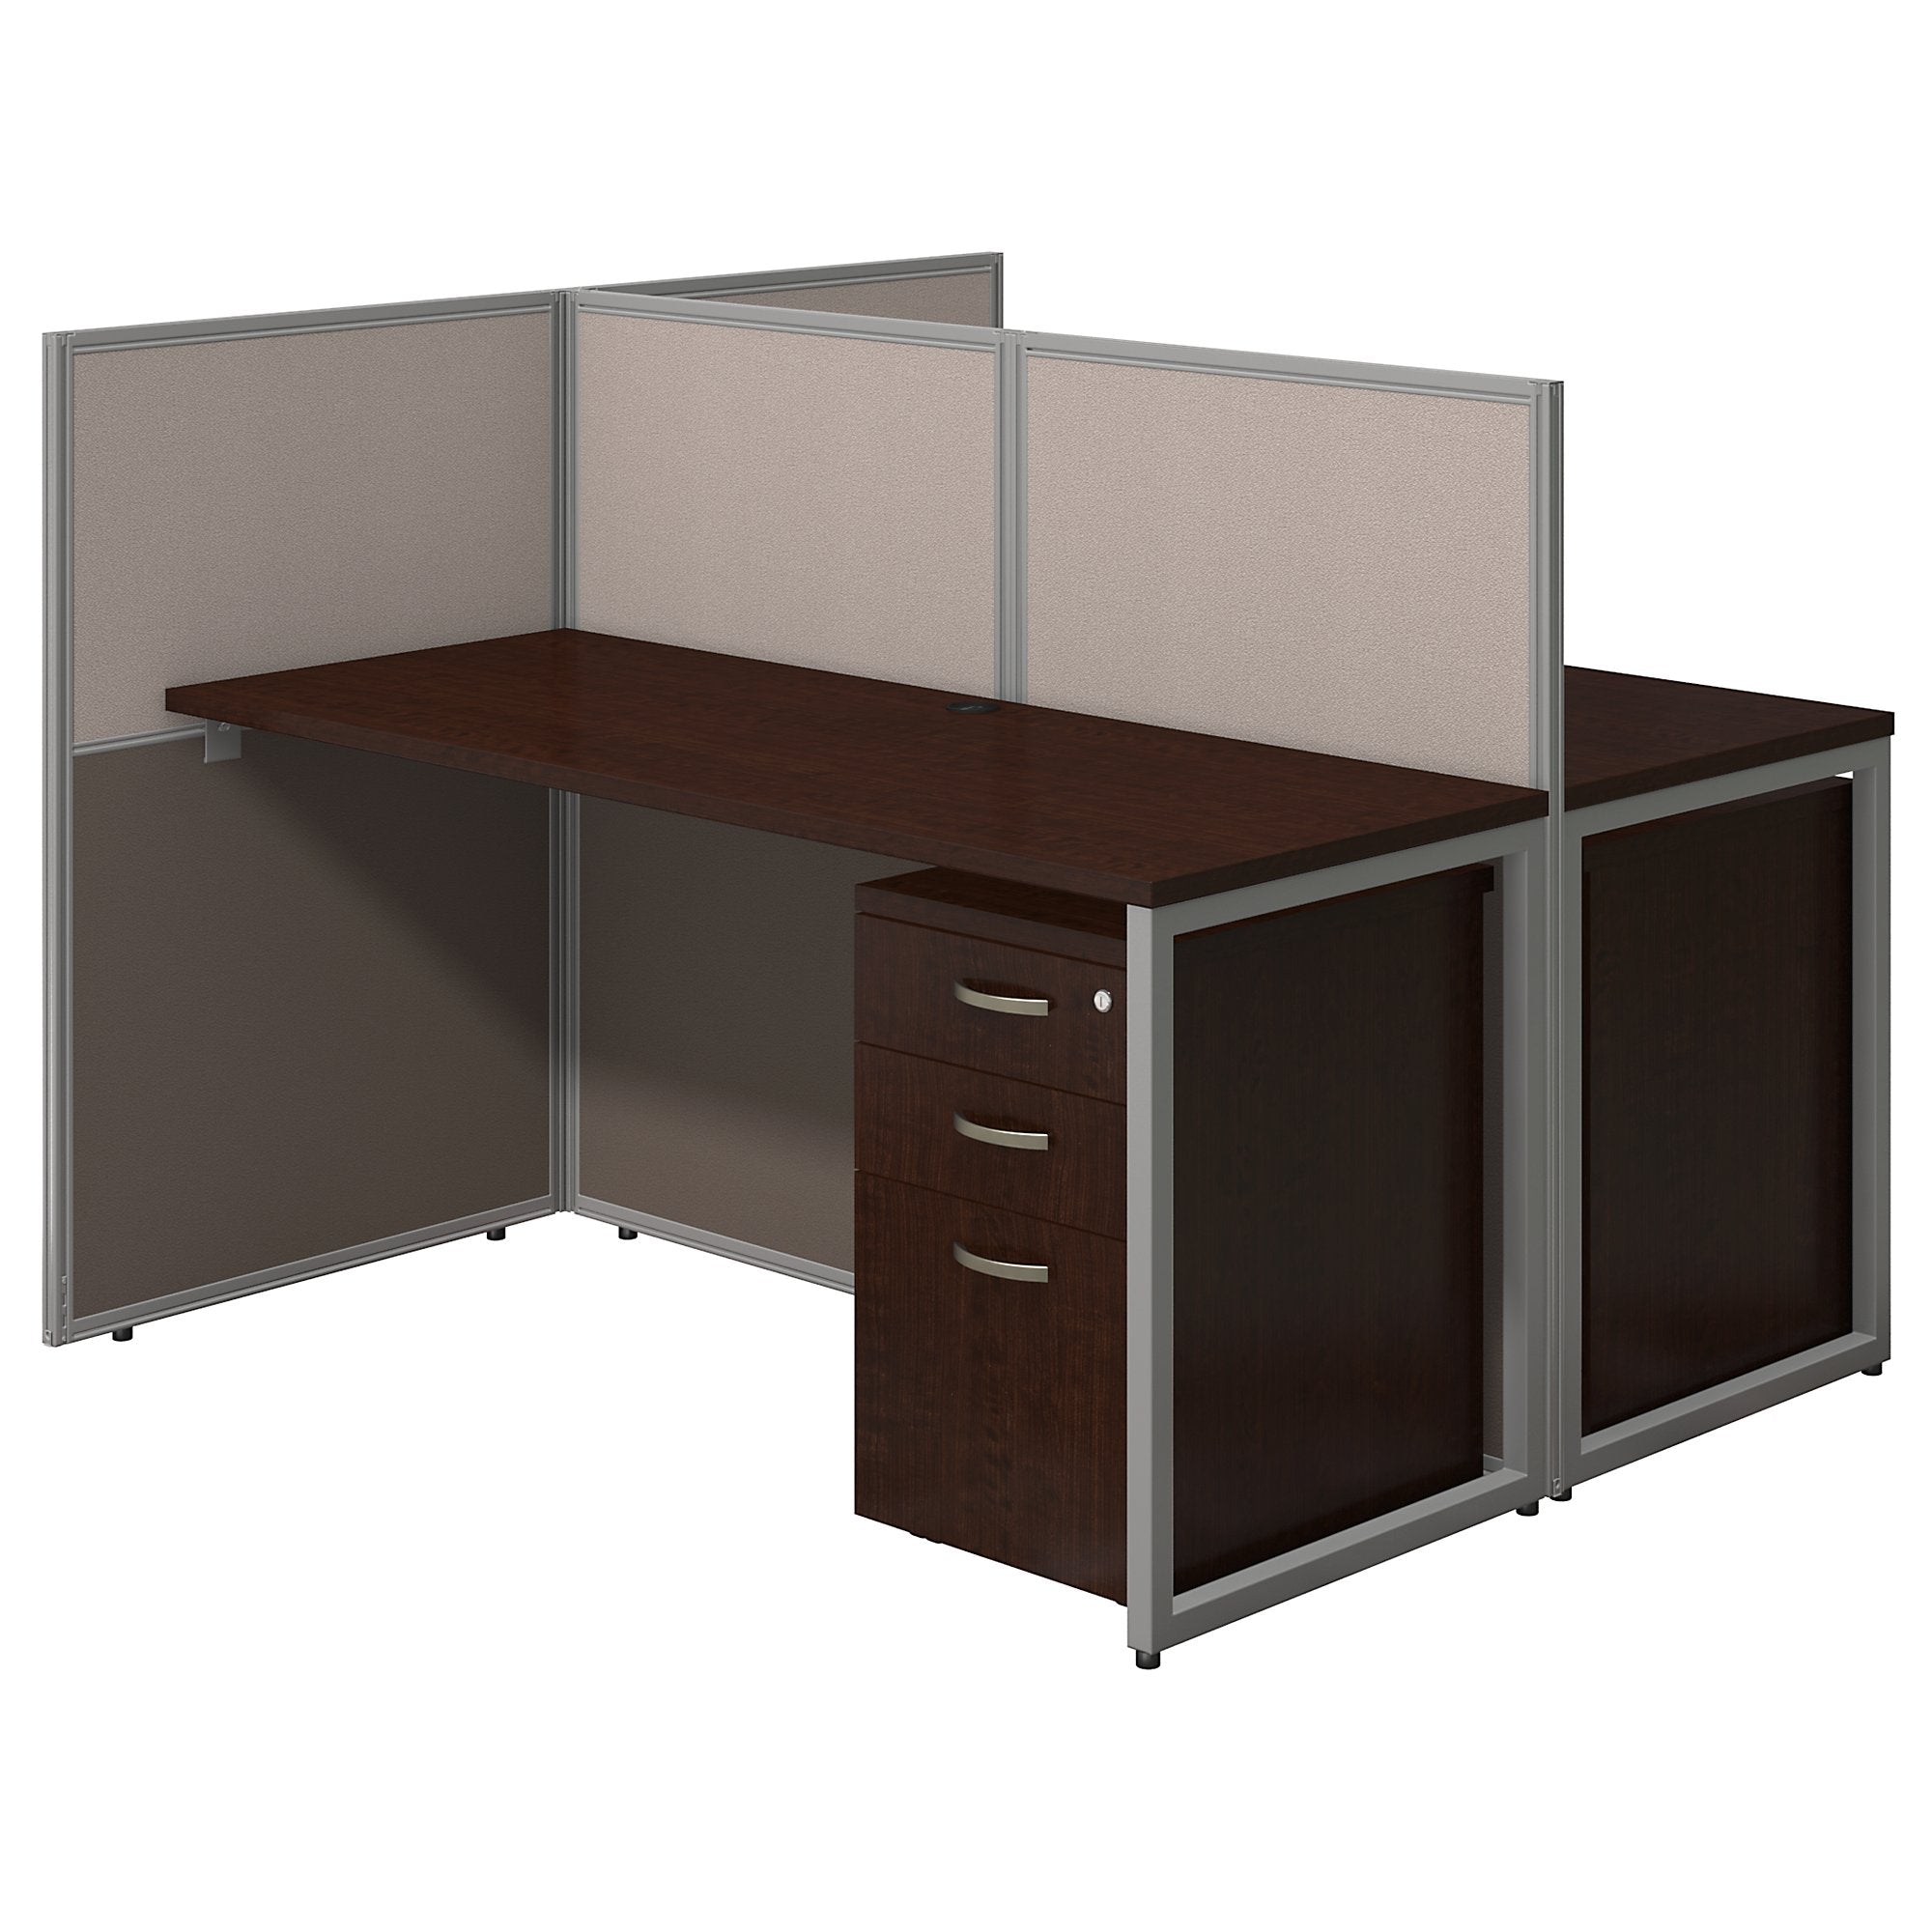 Bush Business Furniture Easy Office: 60W 2 Person Straight Desk Open Office with 3 Drawer Mobile Pedestals - Mocha Cherry - 1